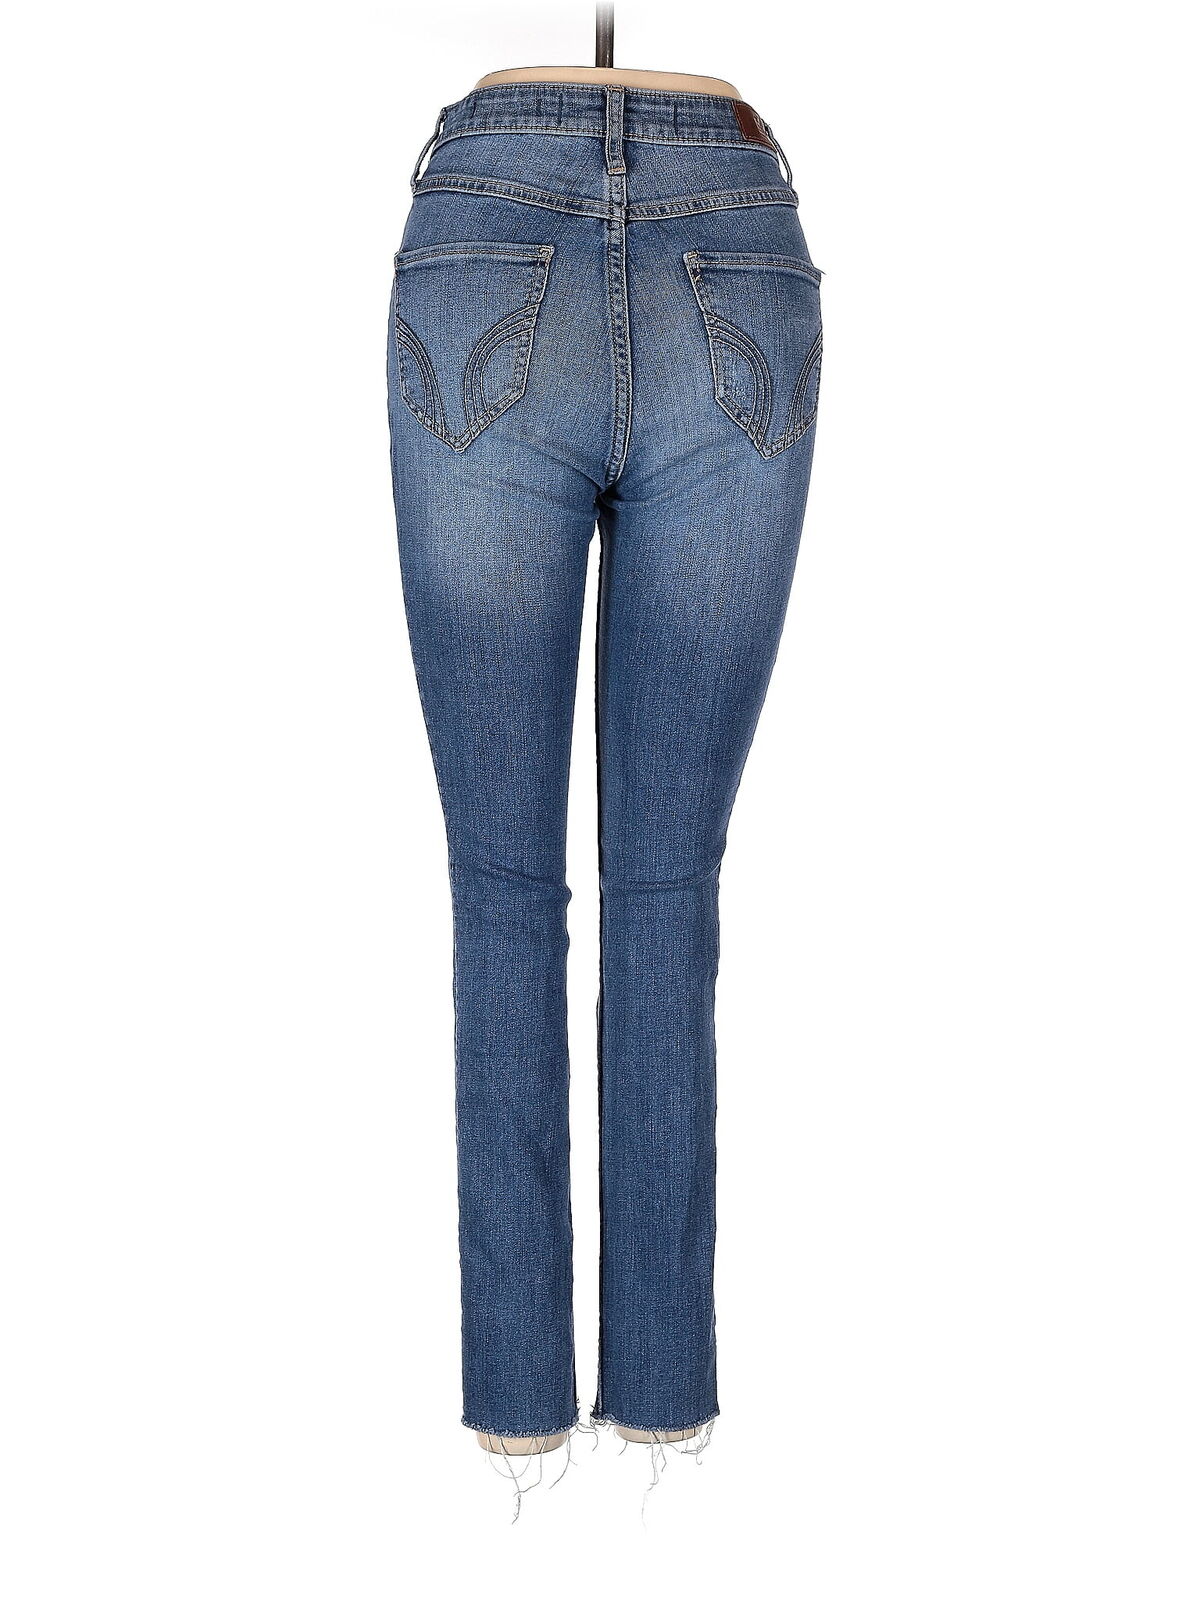 Hollister Women Blue Jeans One Size - image 2